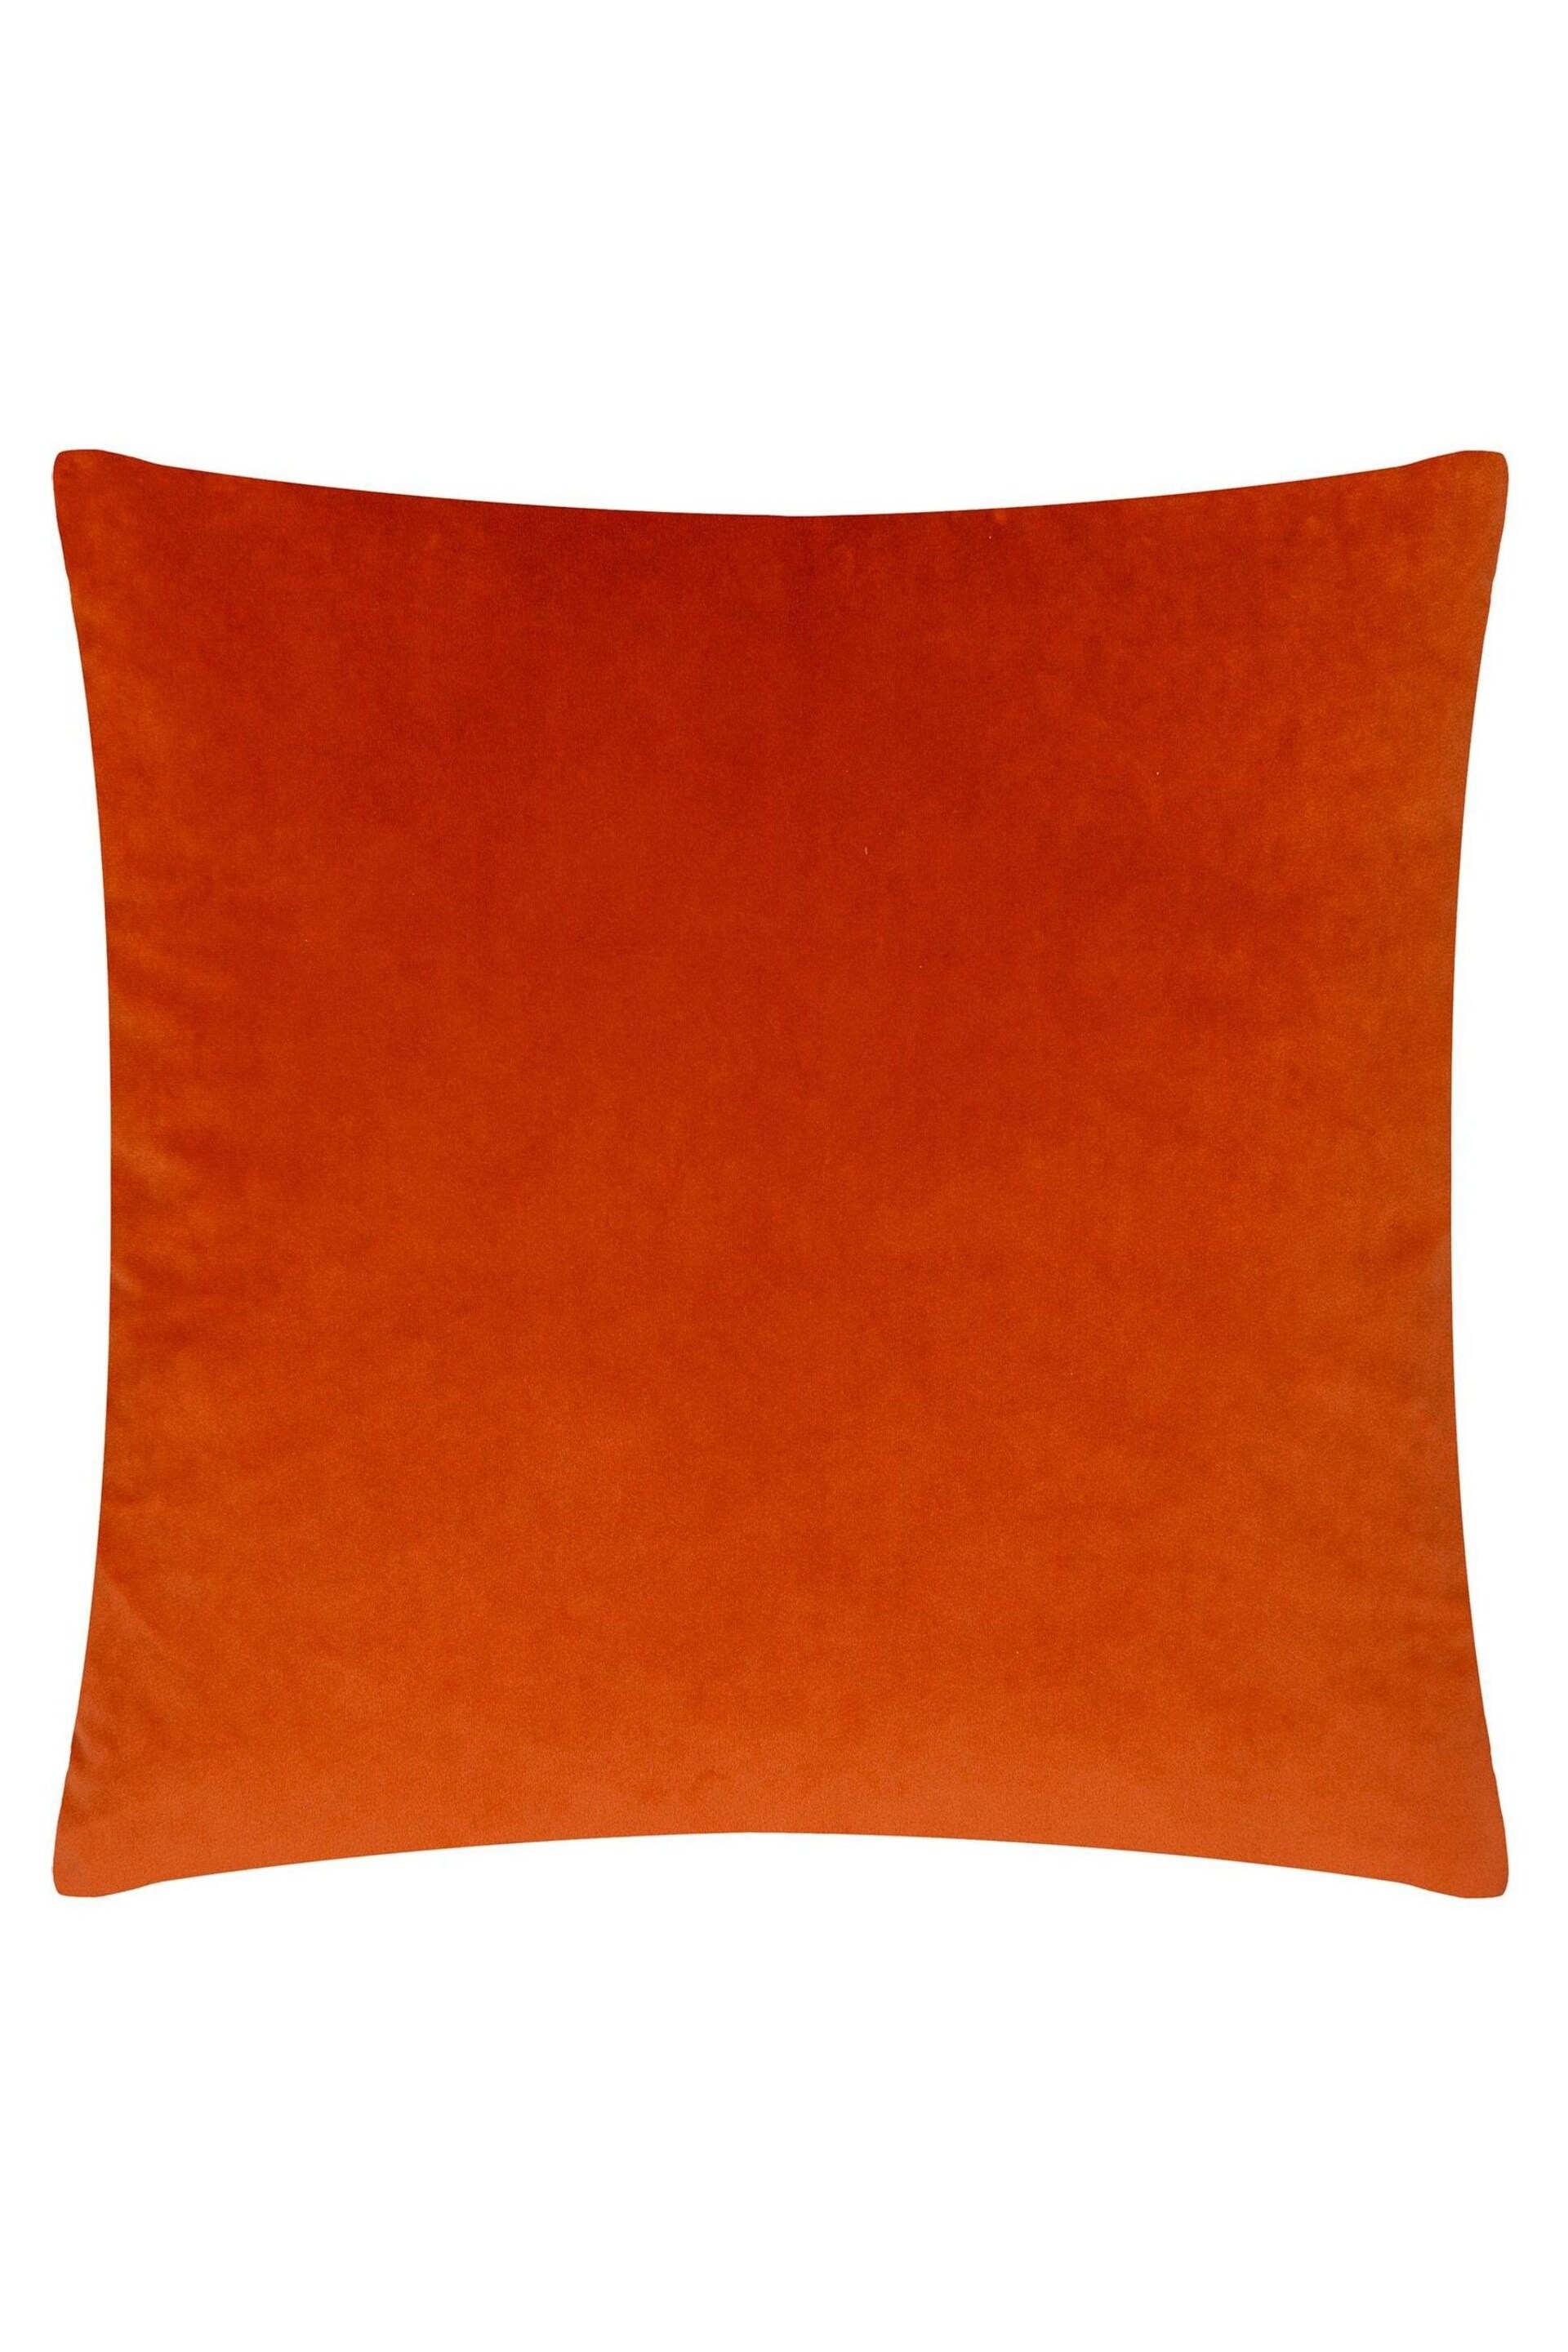 Riva Paoletti Teal Blue/Rust Orange Palm Grove Velvet Polyester Filled Cushion - Image 2 of 5